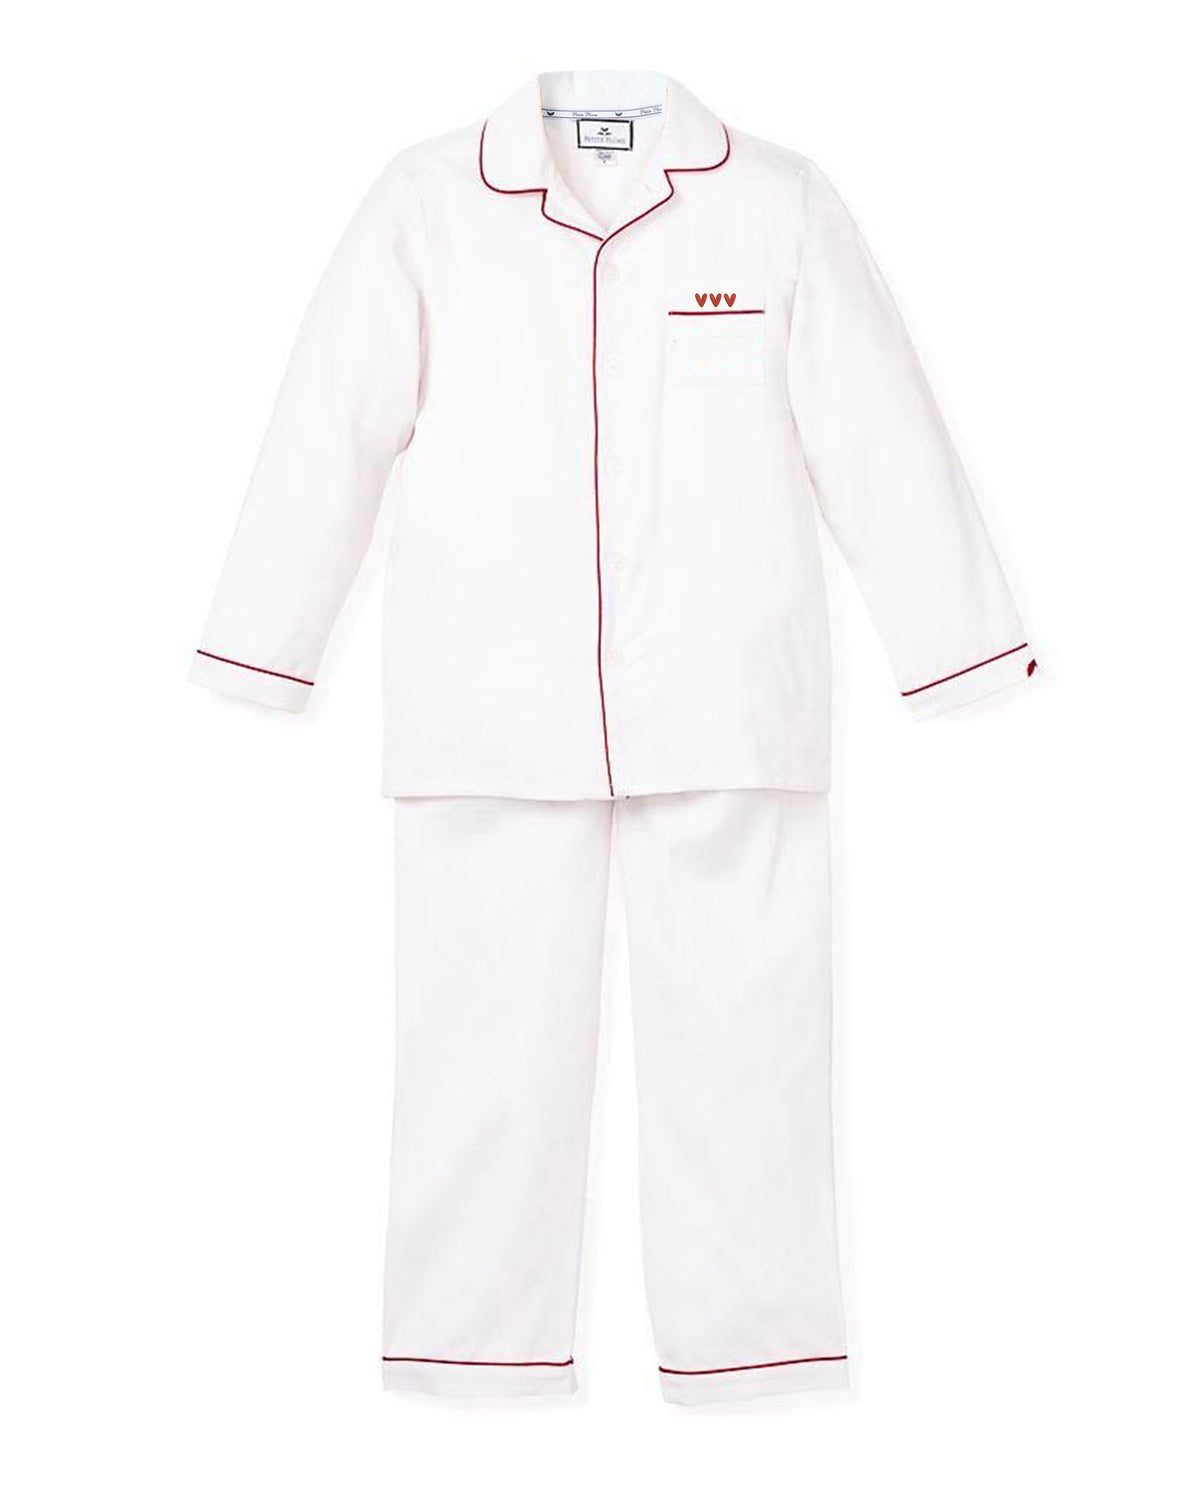 Valentine's Collection Pajamas with Heart Embroidery